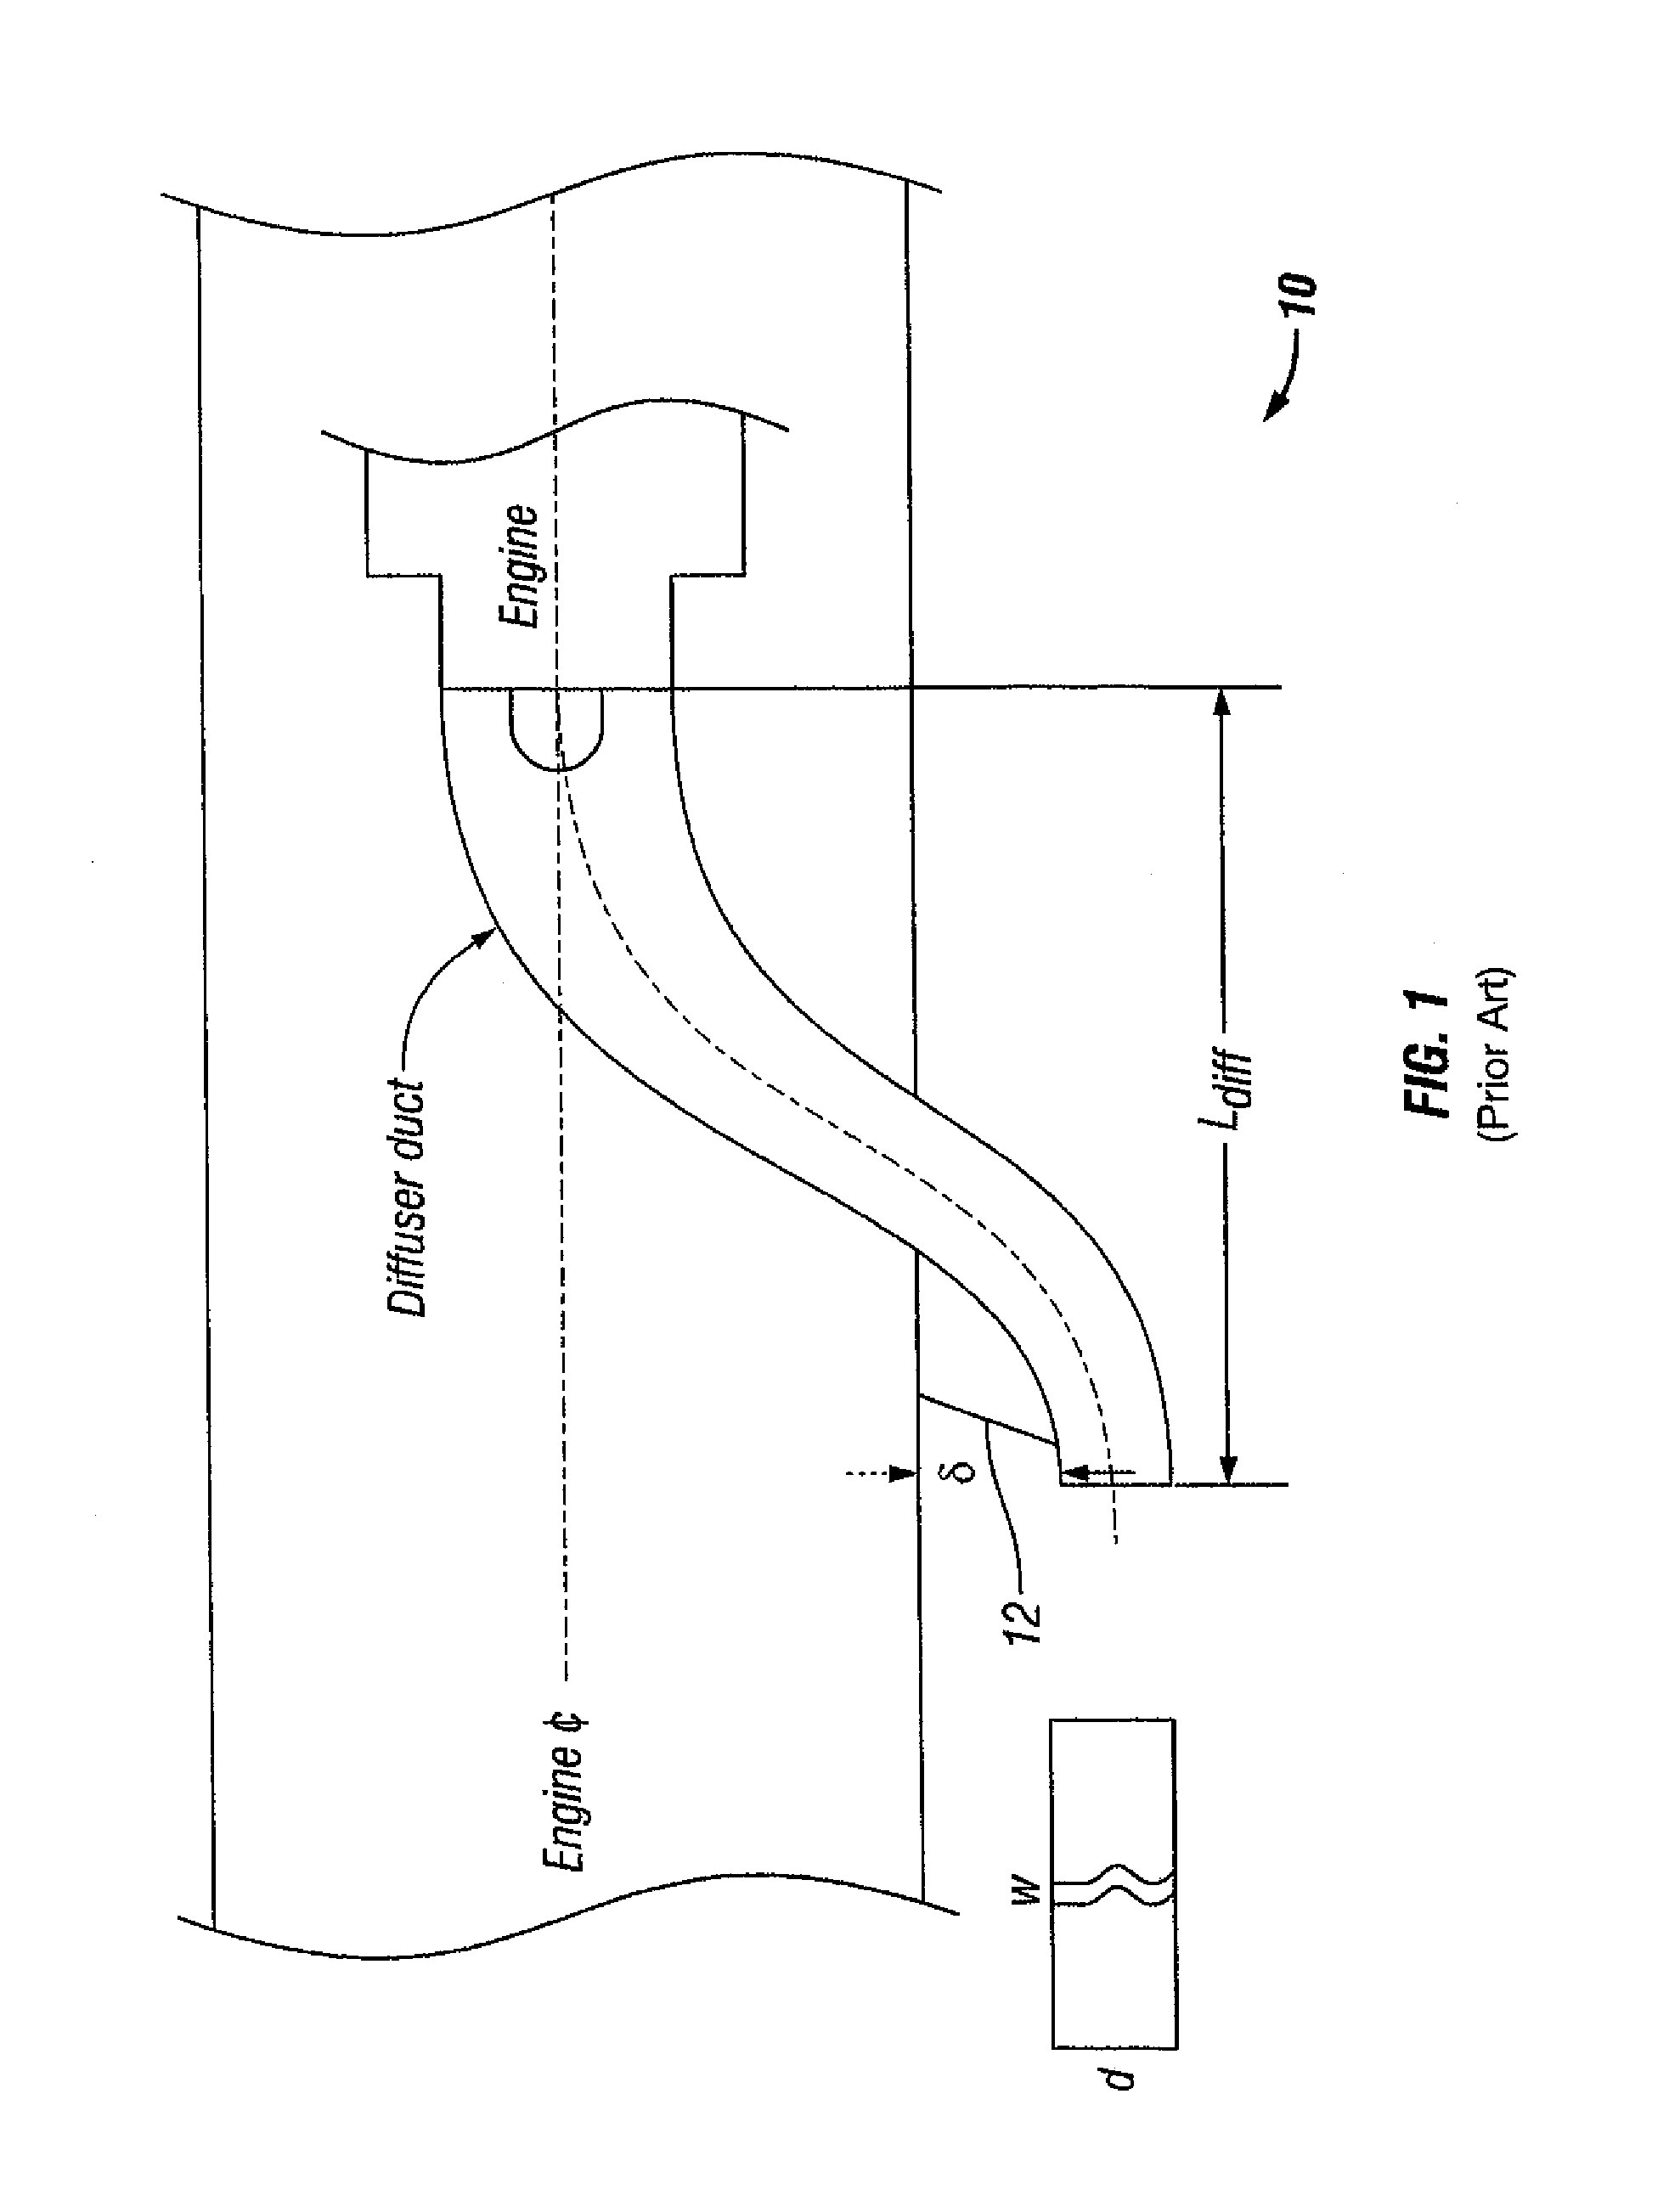 Hybrid (pitot-flush) air intake system for air-breathing missiles and aircraft